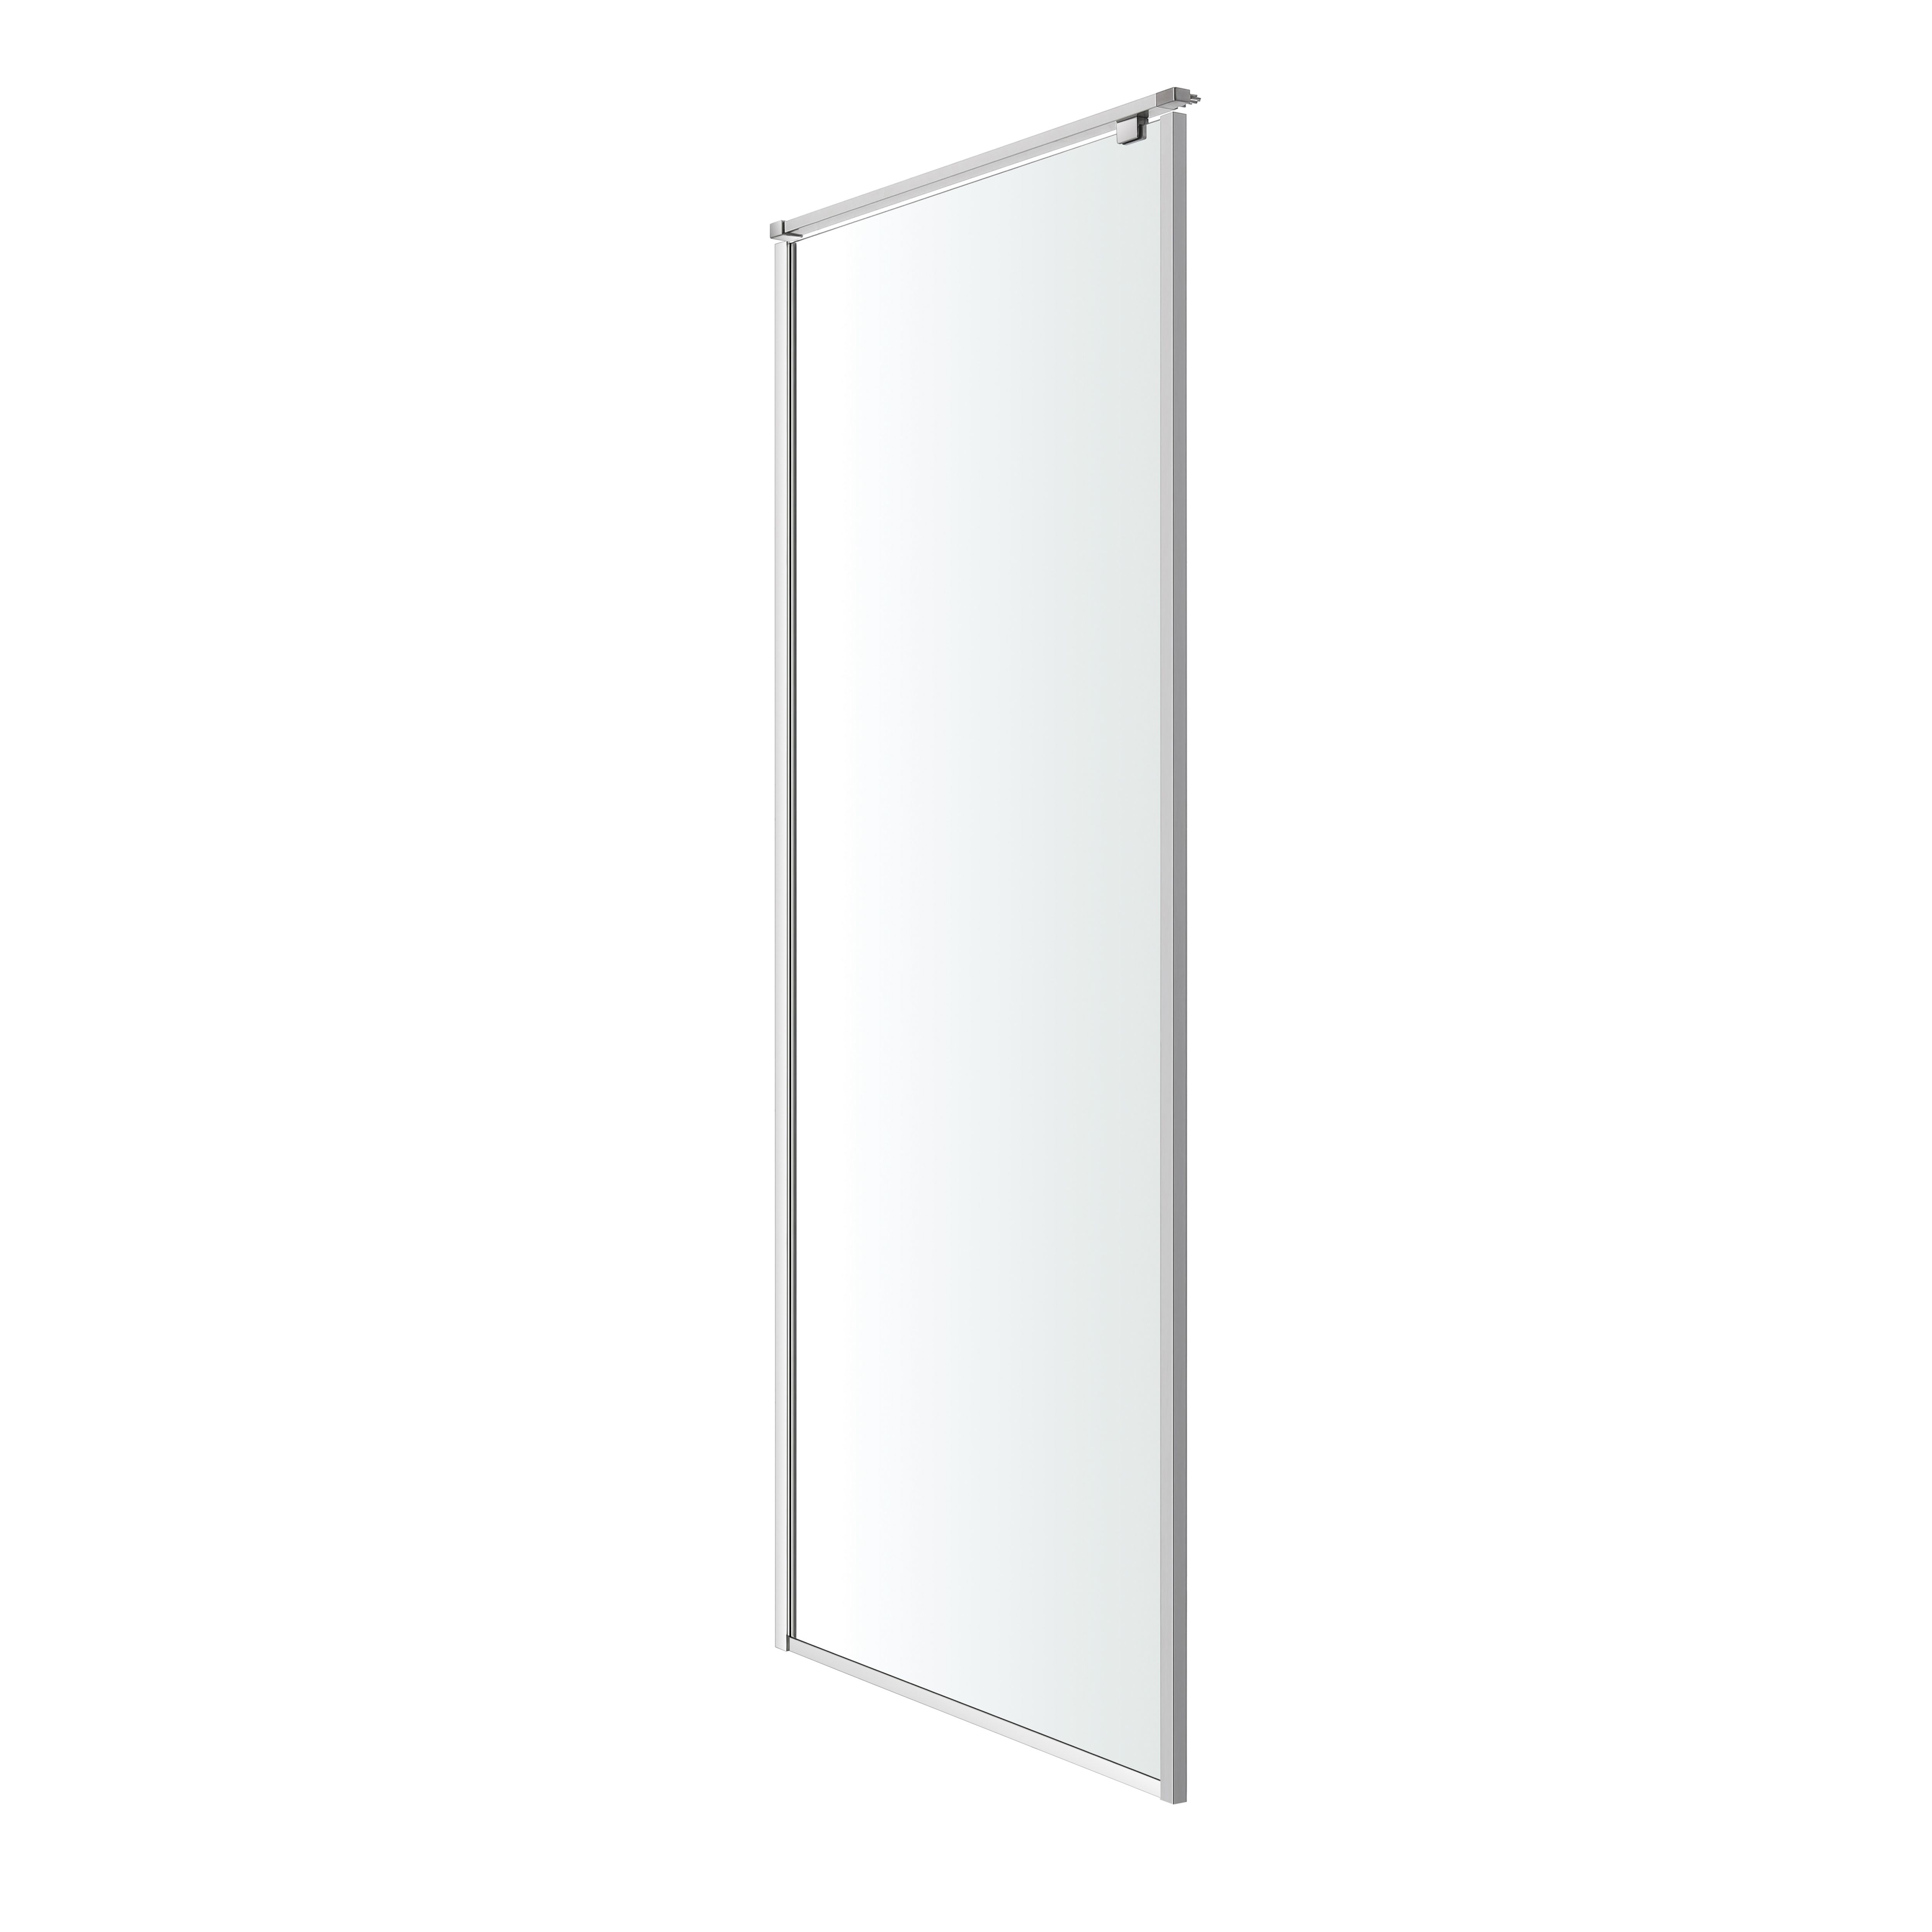 GoodHome Ezili Silver effect Clear glass Fixed Side Shower panel (H)195cm (W)80cm